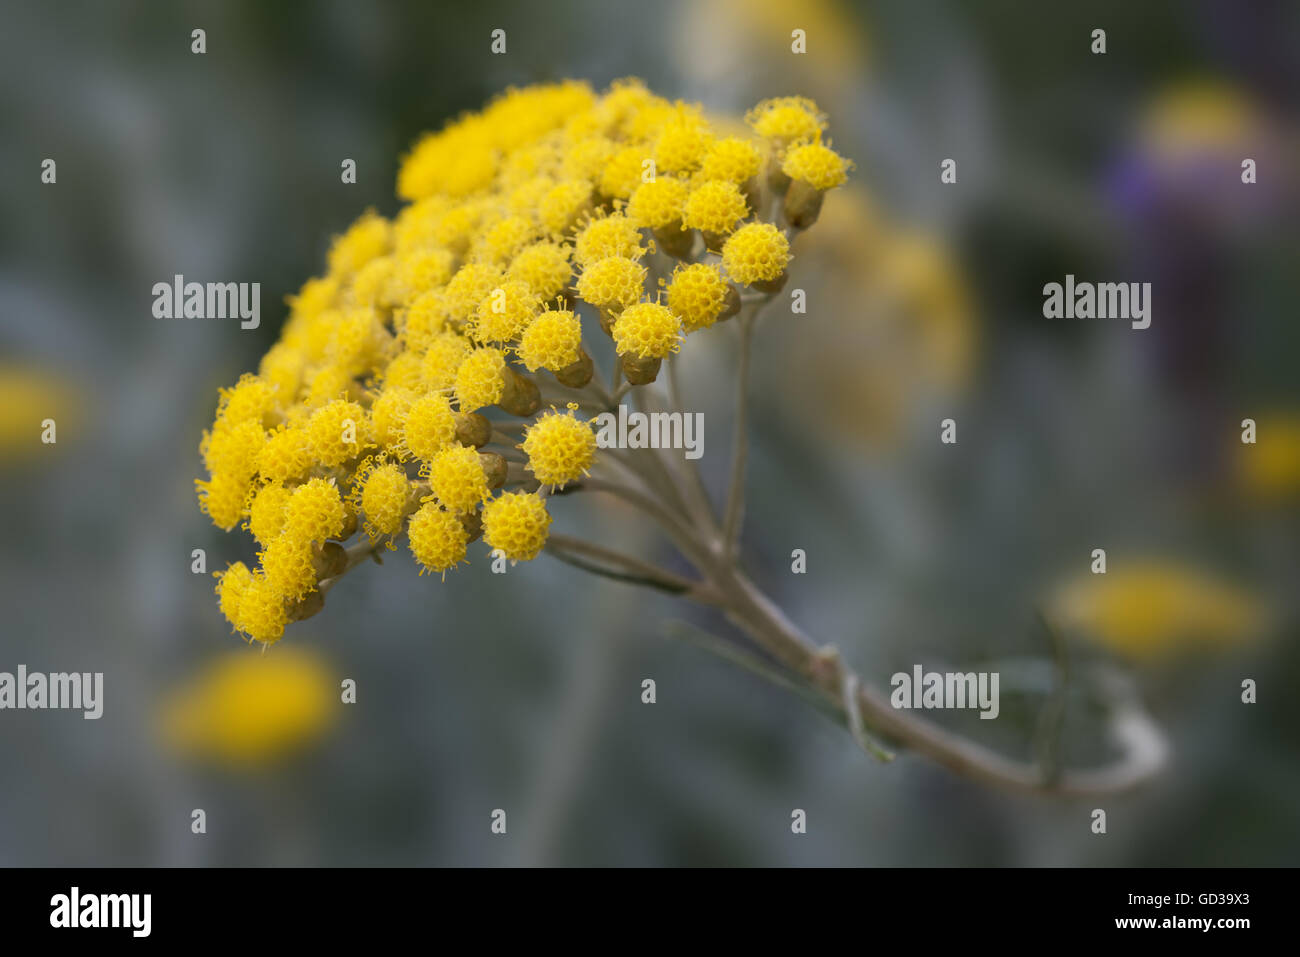 helichrysum flowers on a blurred background Stock Photo